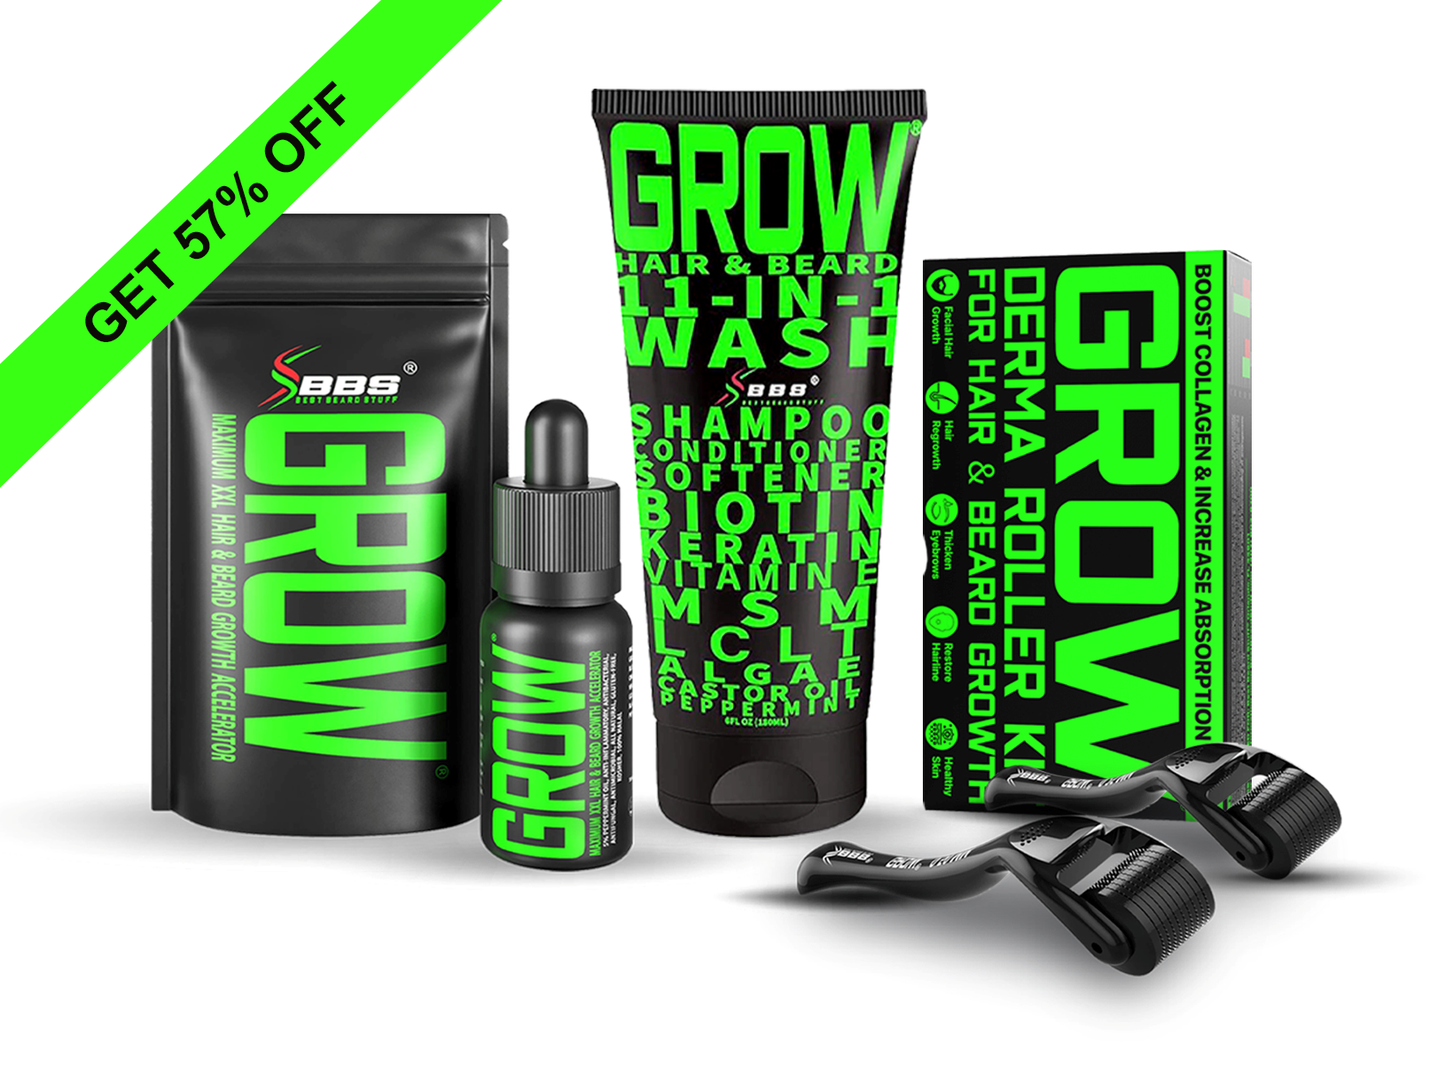 SPECIAL OFFER!!! GROW® EPIC Hair & Beard 11-in-1 Wash Growth Kit Upgrade